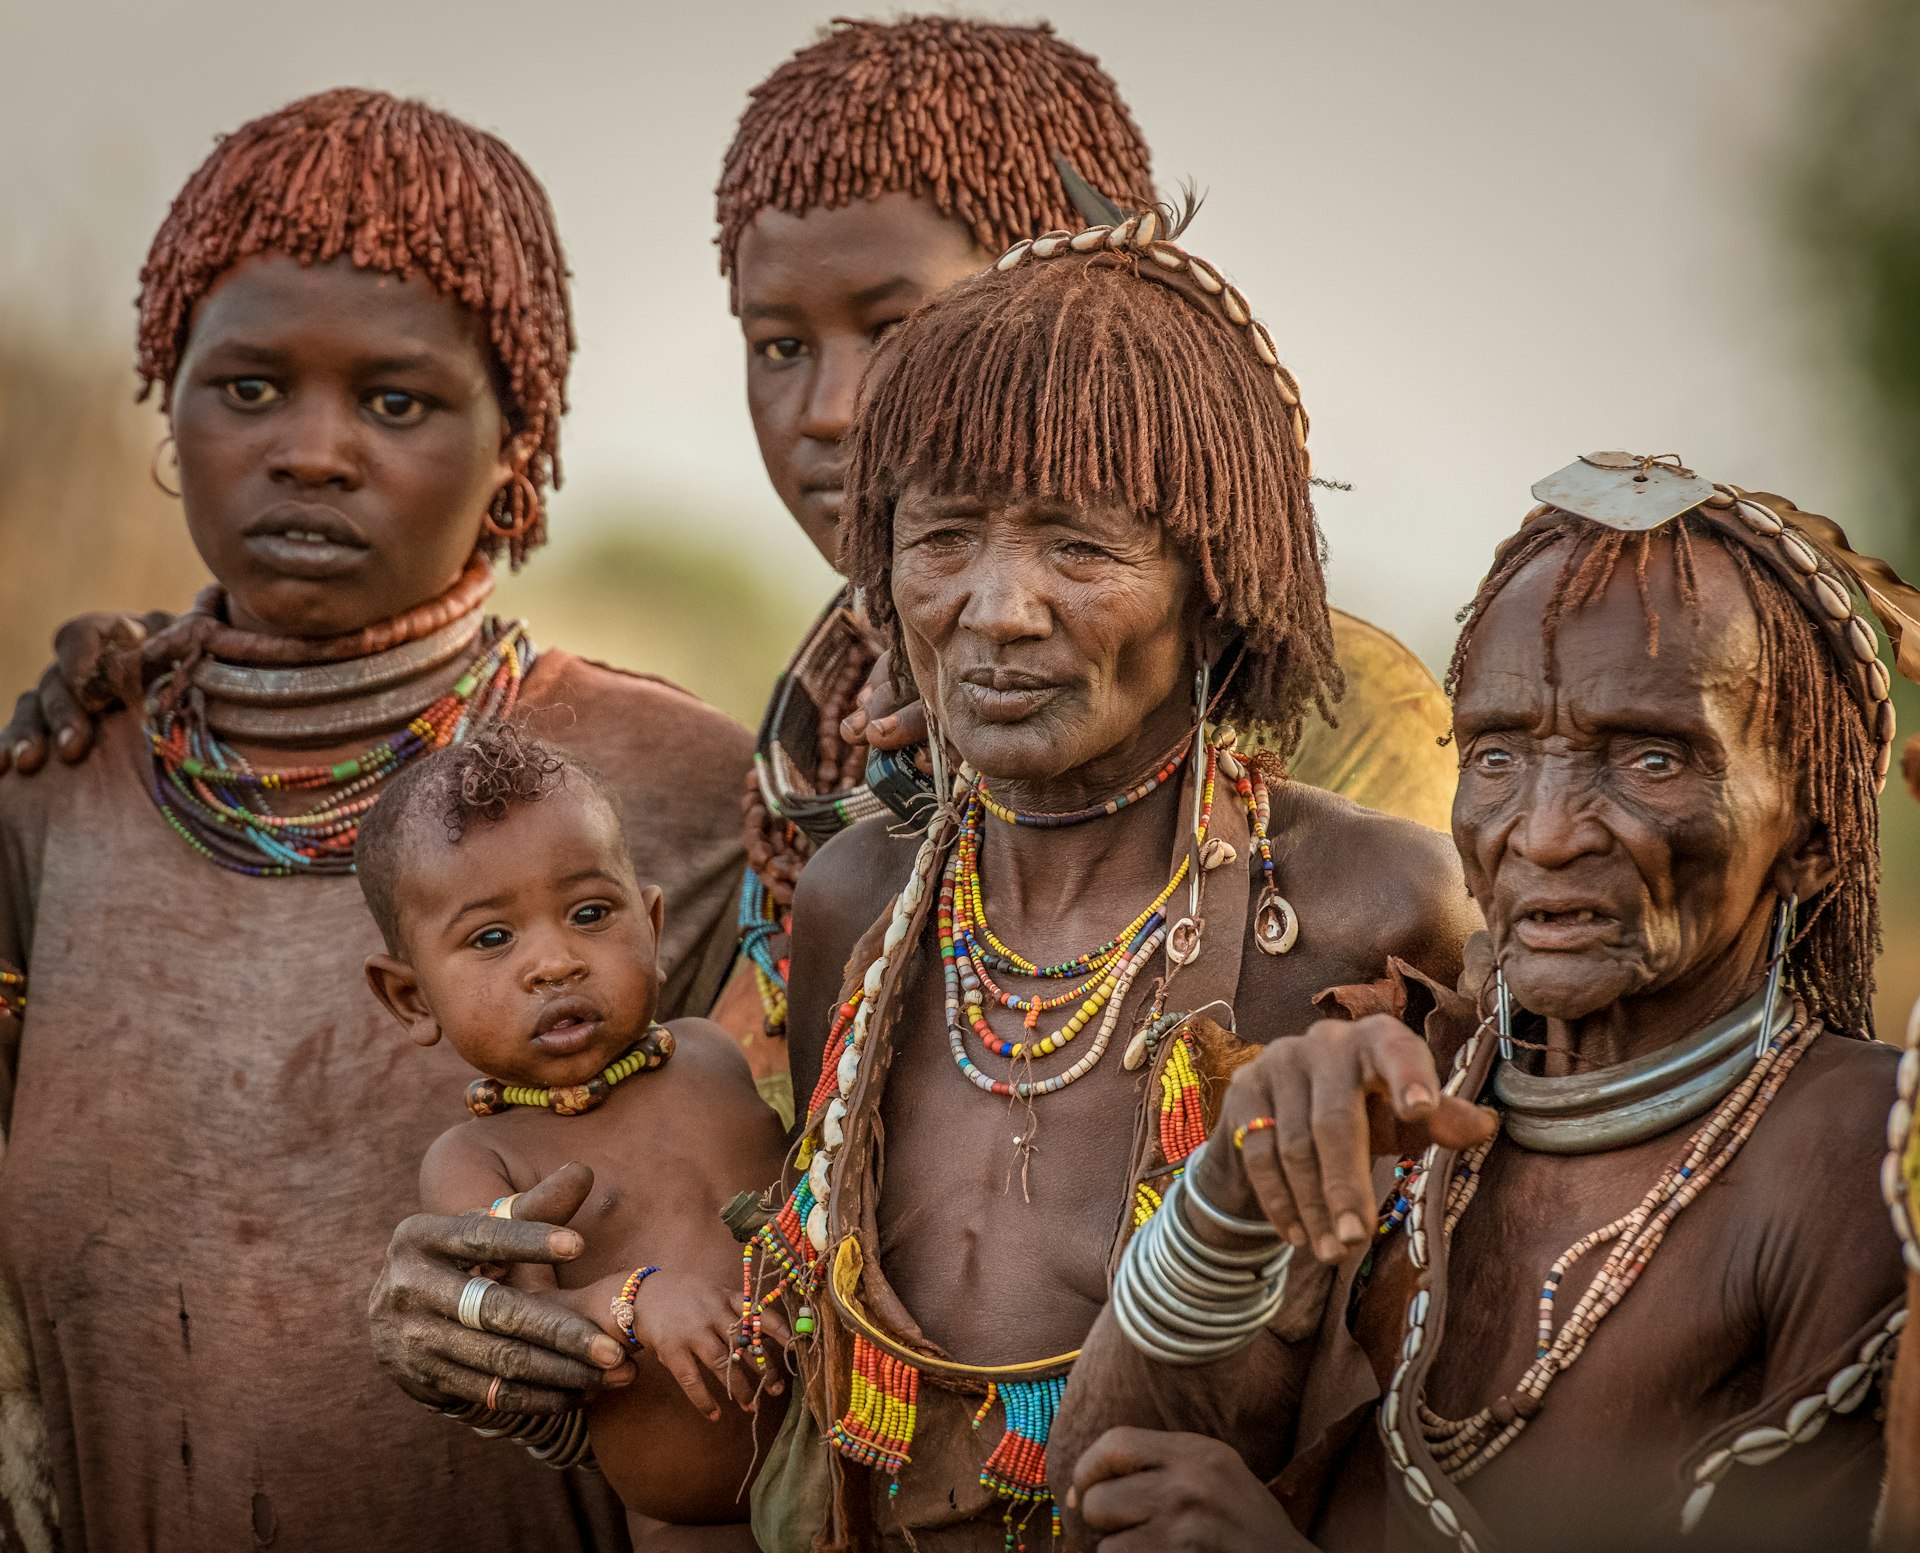 A group of tribes people of all ages stand together. The woman in the center is holding a young baby